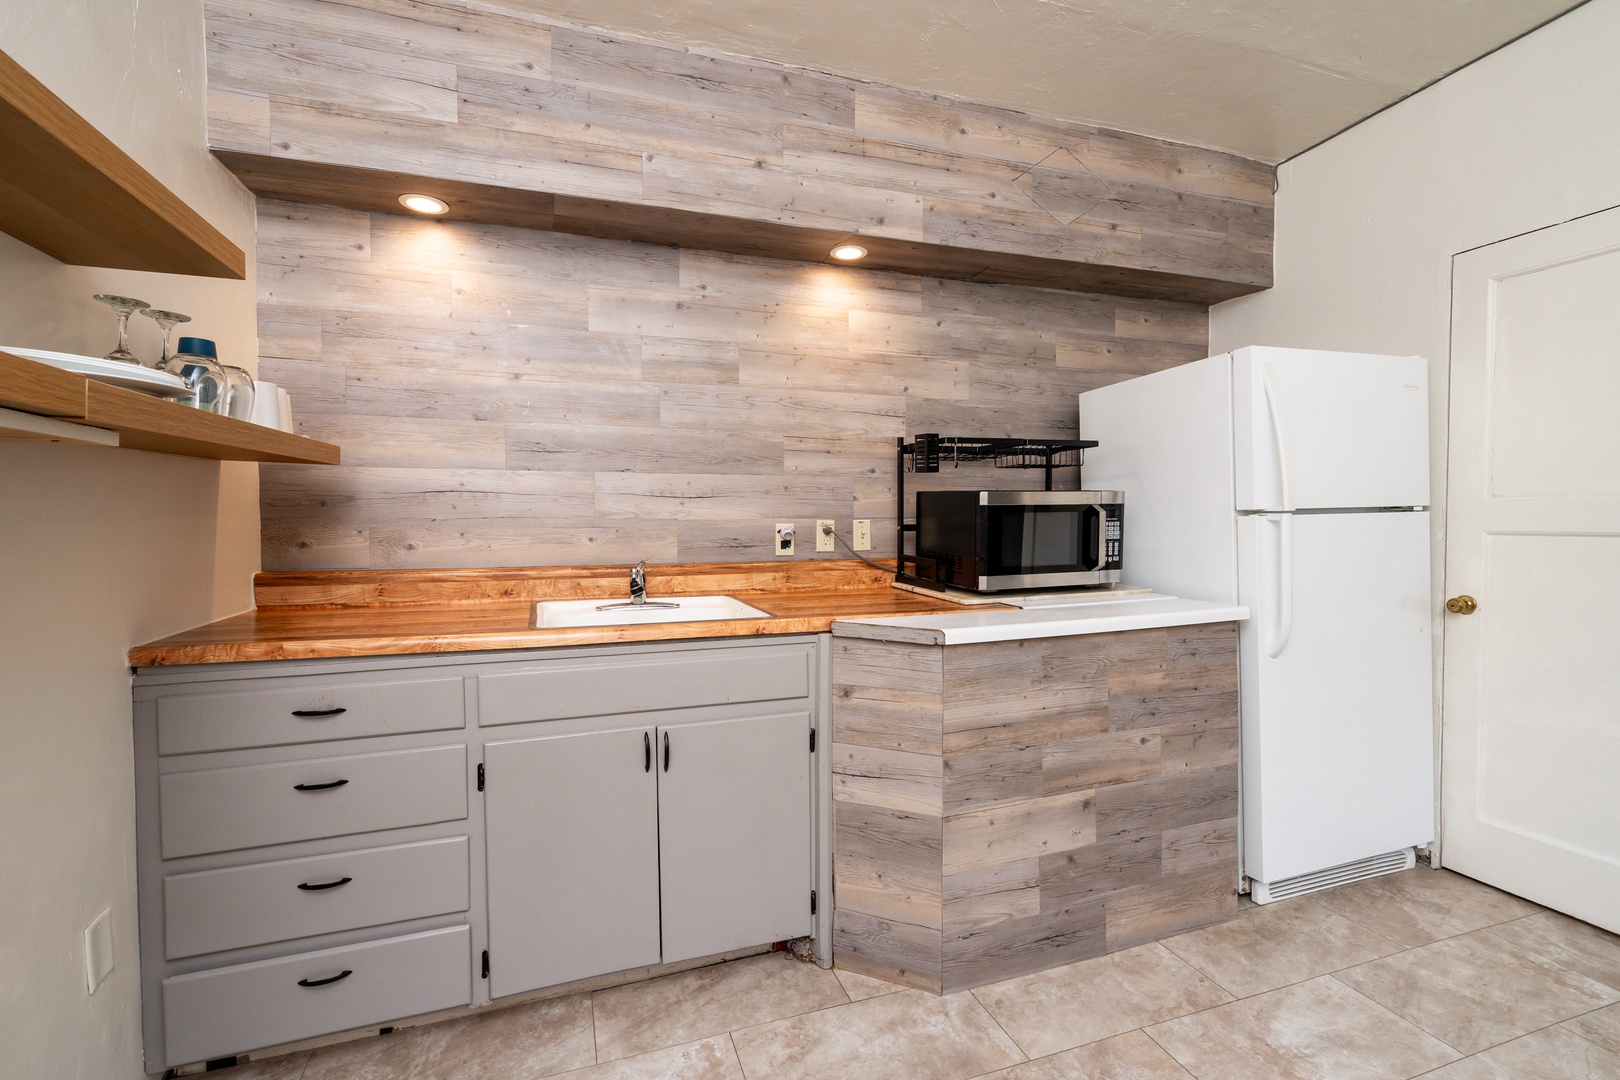 The eat-in kitchen offers a comfortable atmosphere with ample amenities